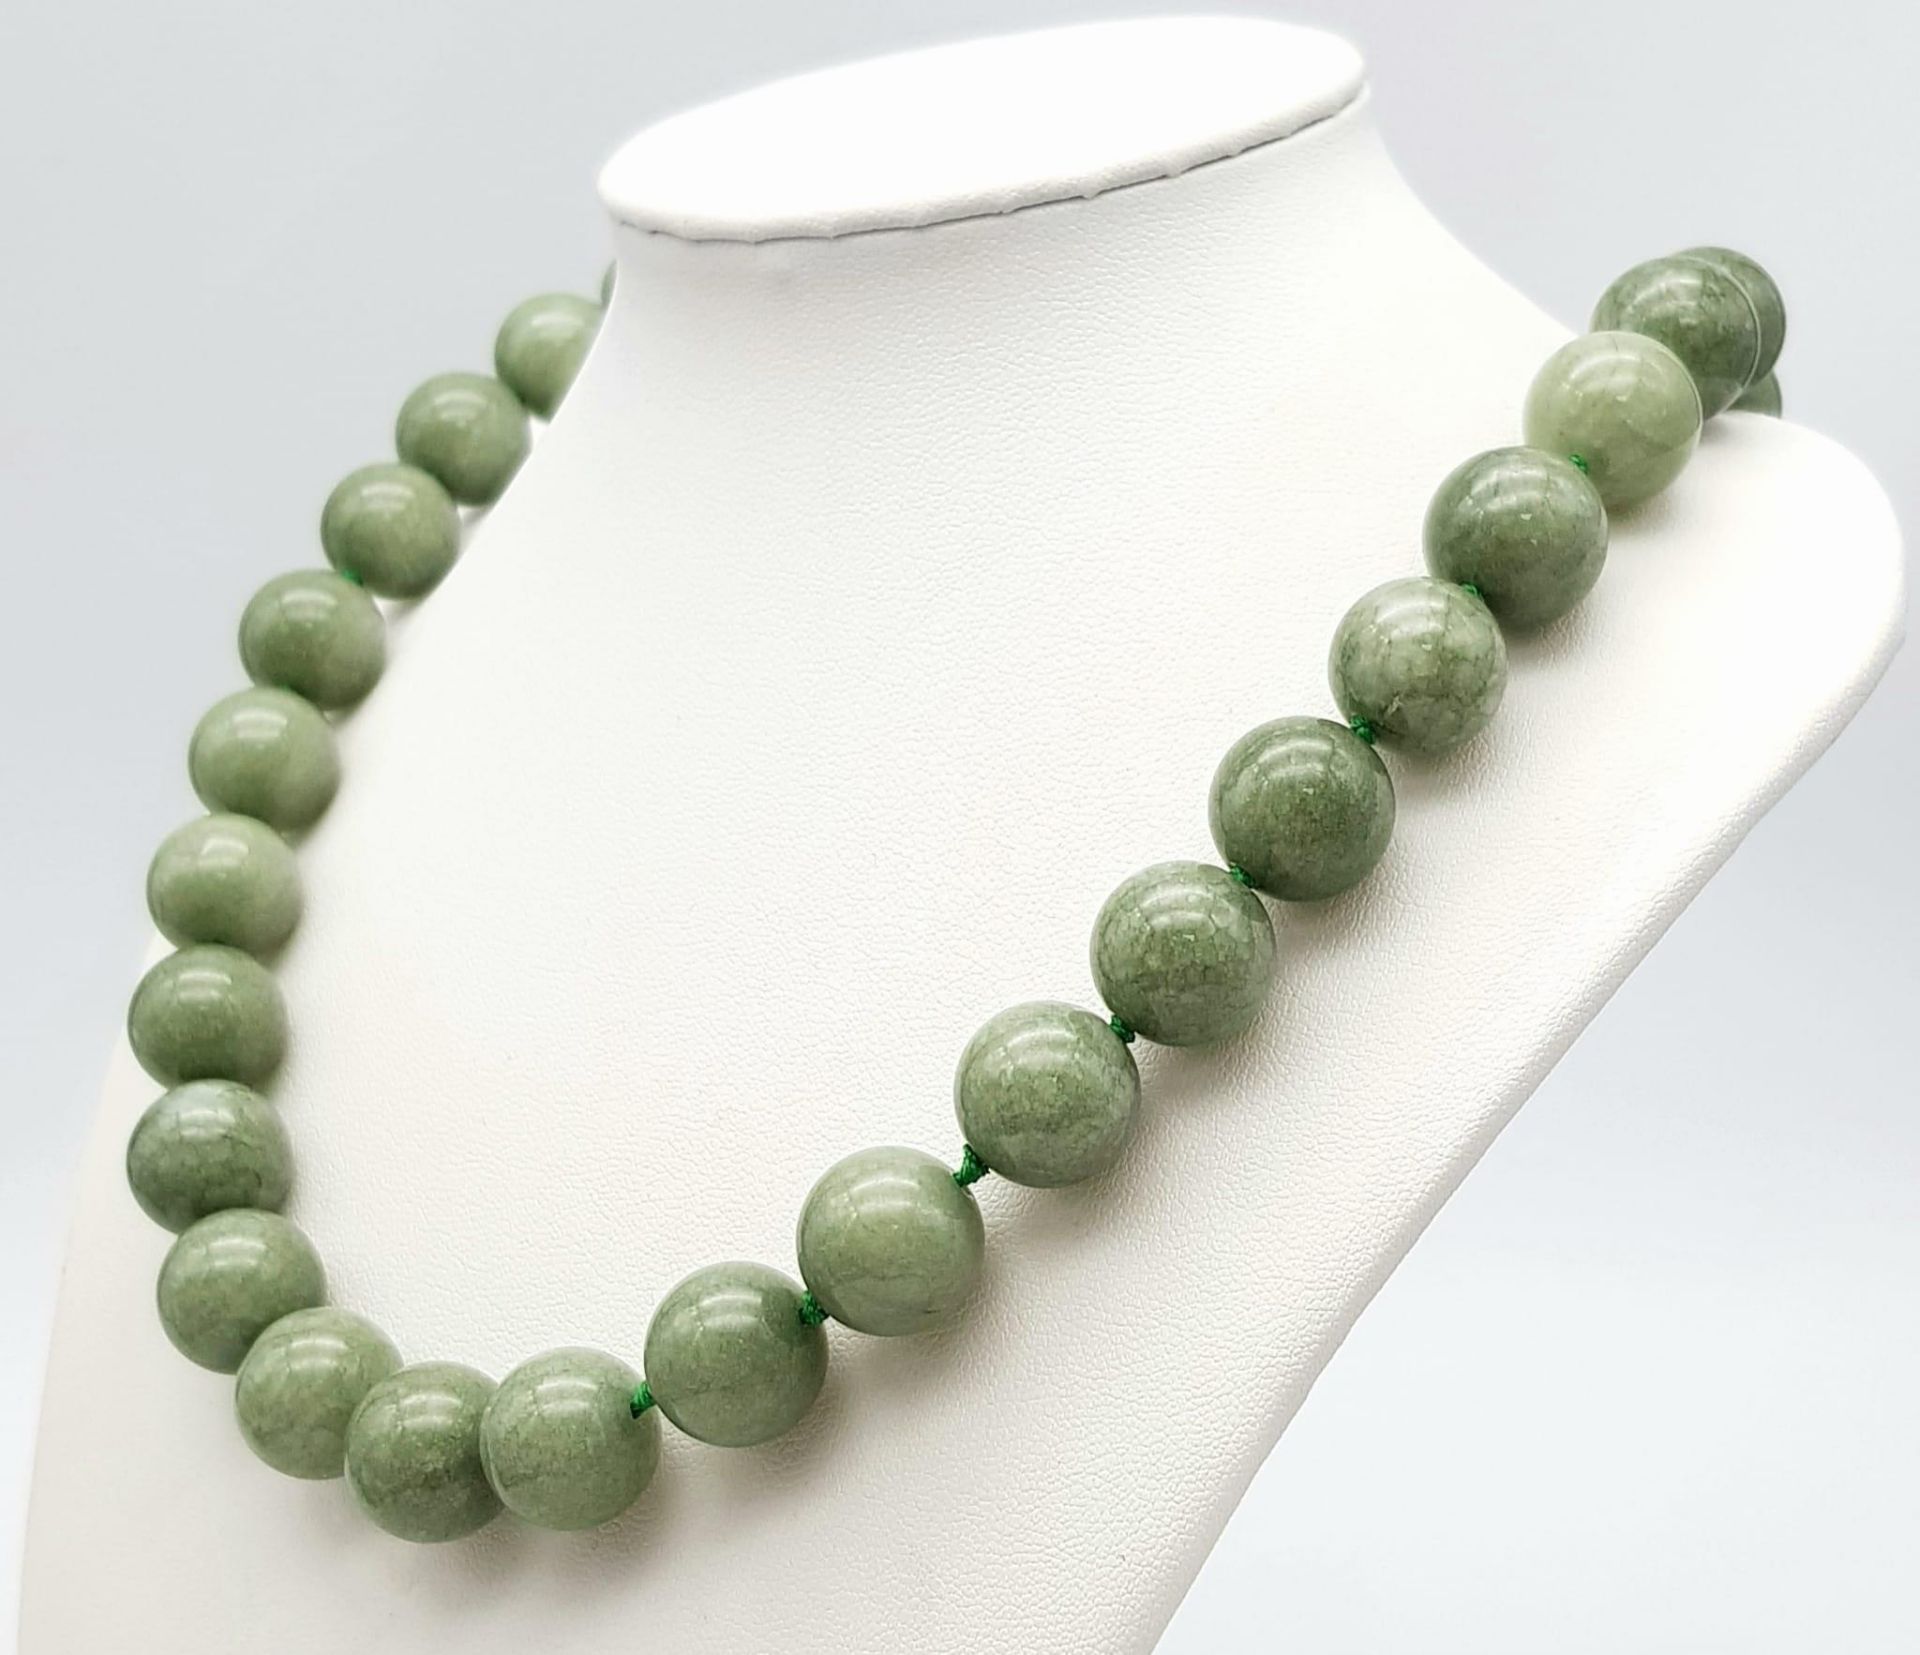 A Chinese 'Frozen Moss' Green Coloured Jade Necklace. 14mm beads. 46cm necklace length. - Image 2 of 3